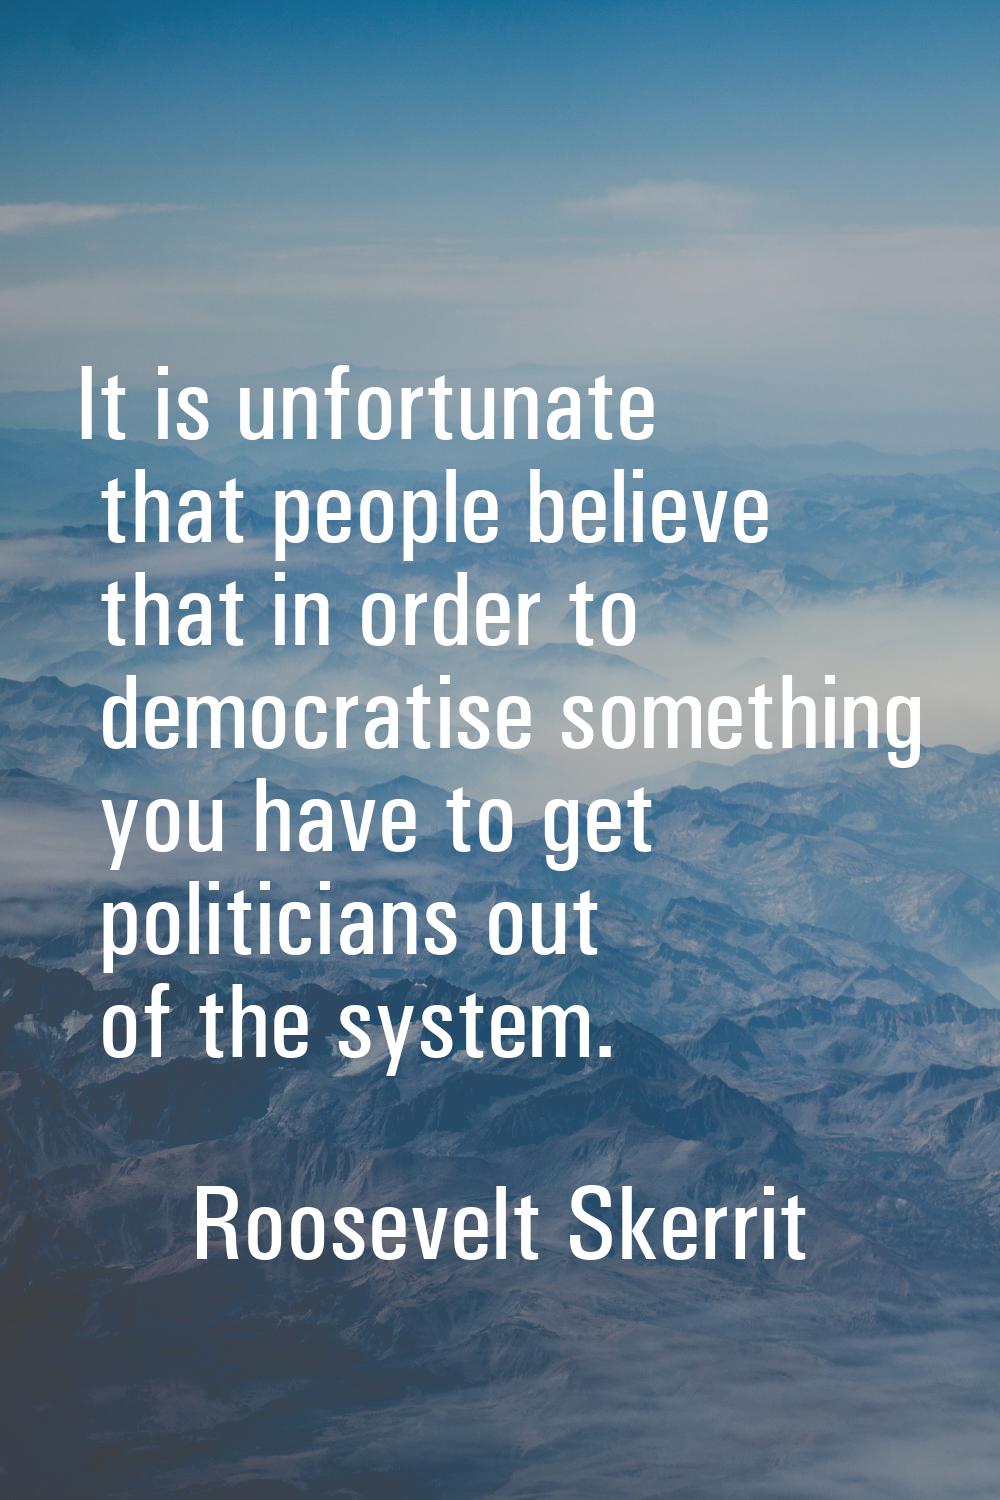 It is unfortunate that people believe that in order to democratise something you have to get politi